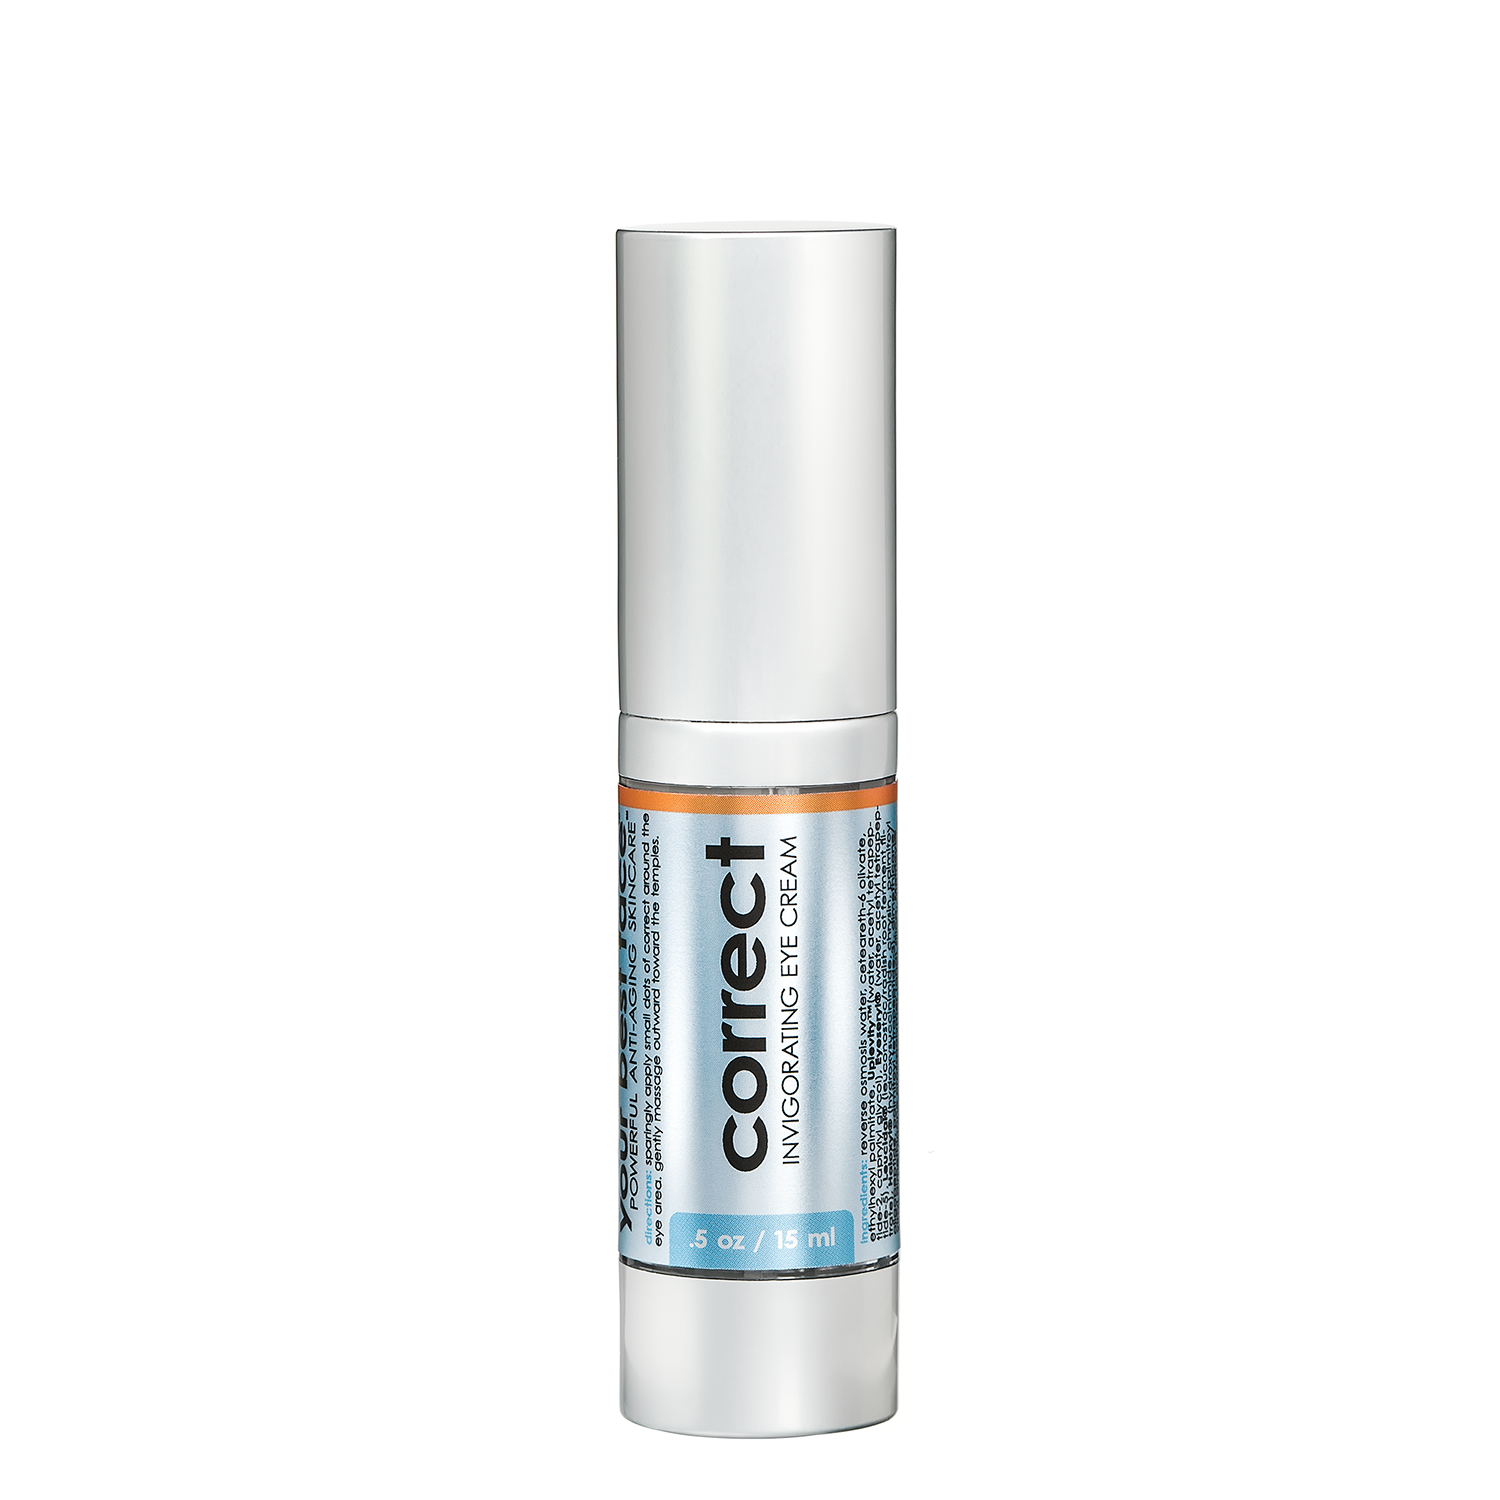 Bottle of Correct Eye Cream by Your Best Face